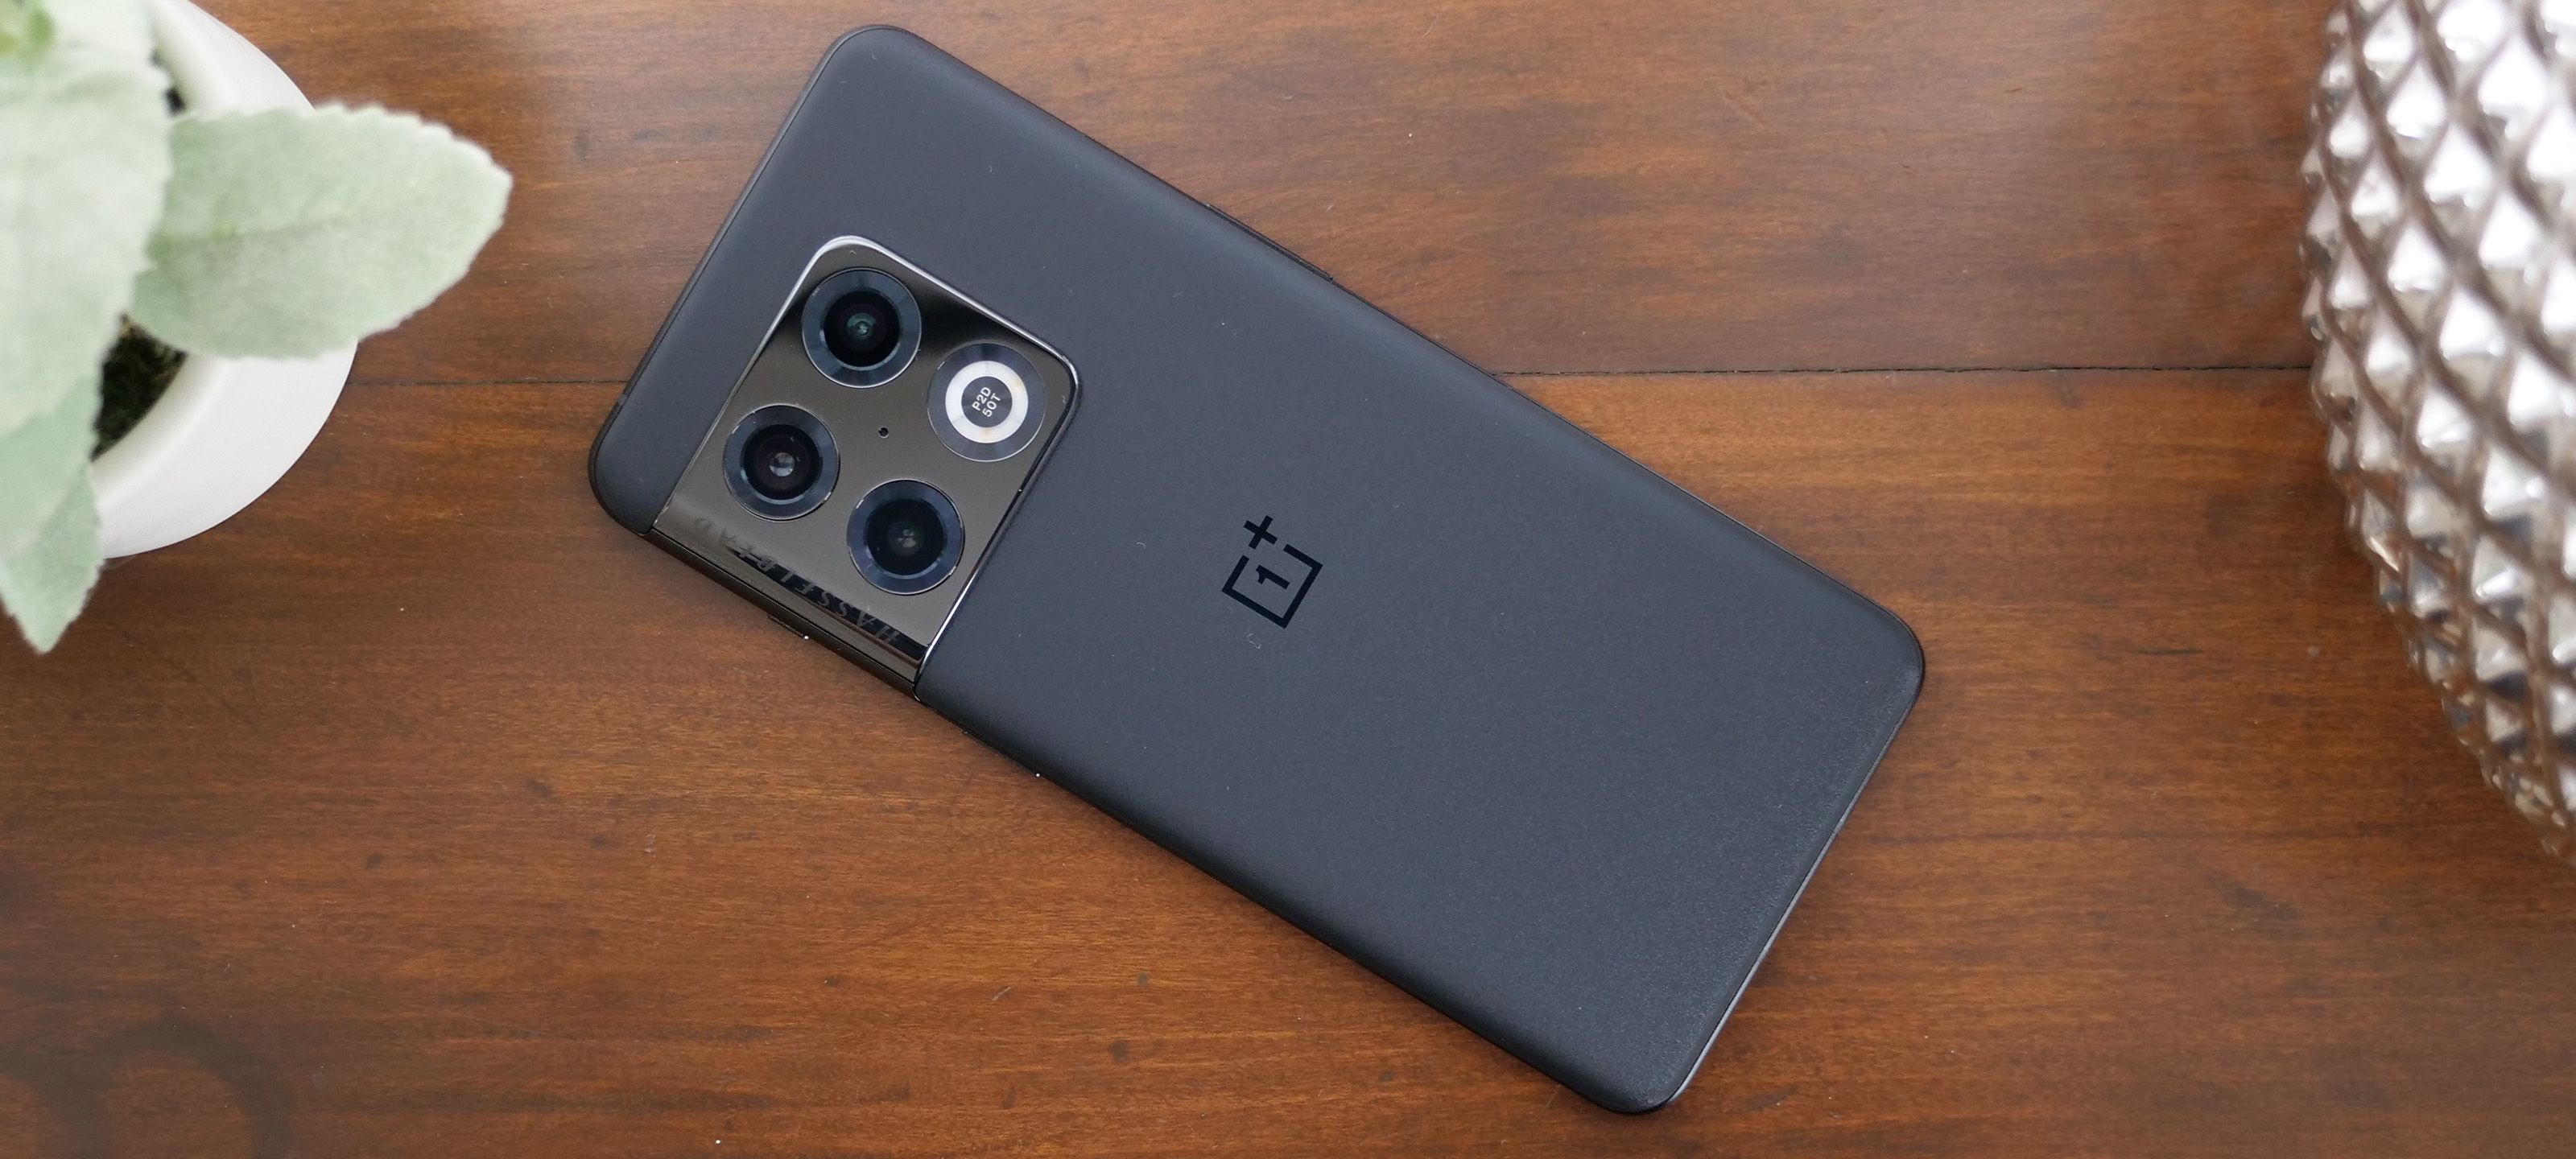 OnePlus 10 Pro Review: An all-round premium smartphone